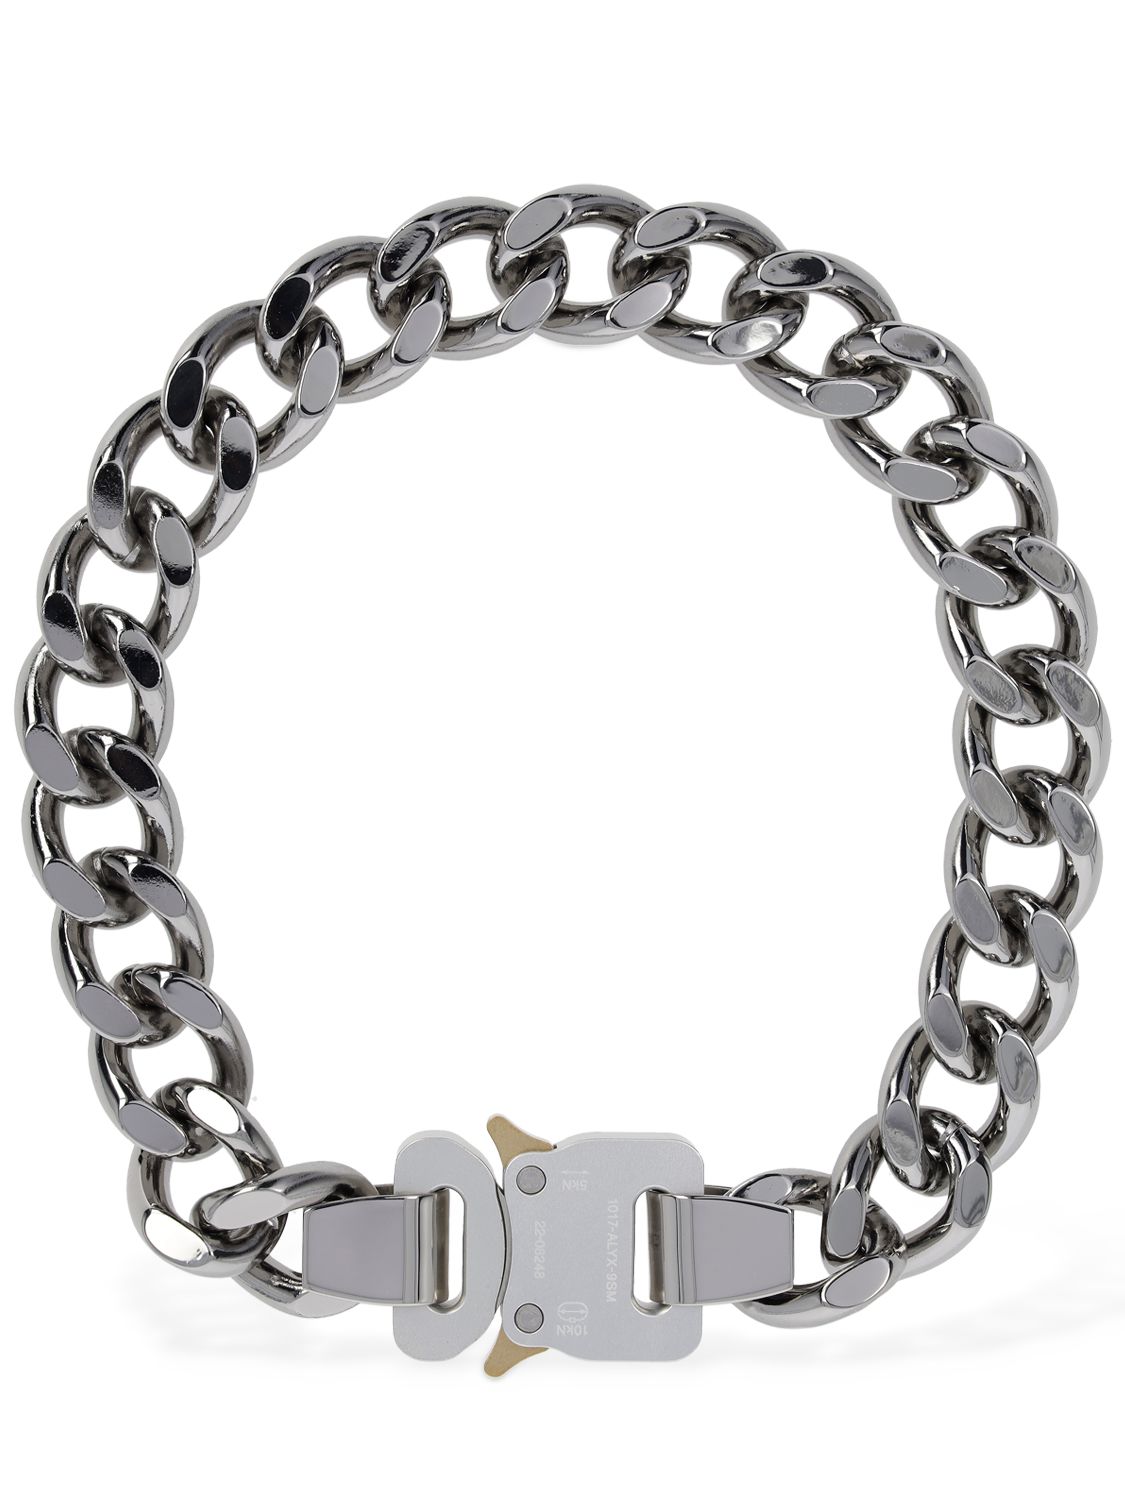 Chain Necklace W/ Buckle